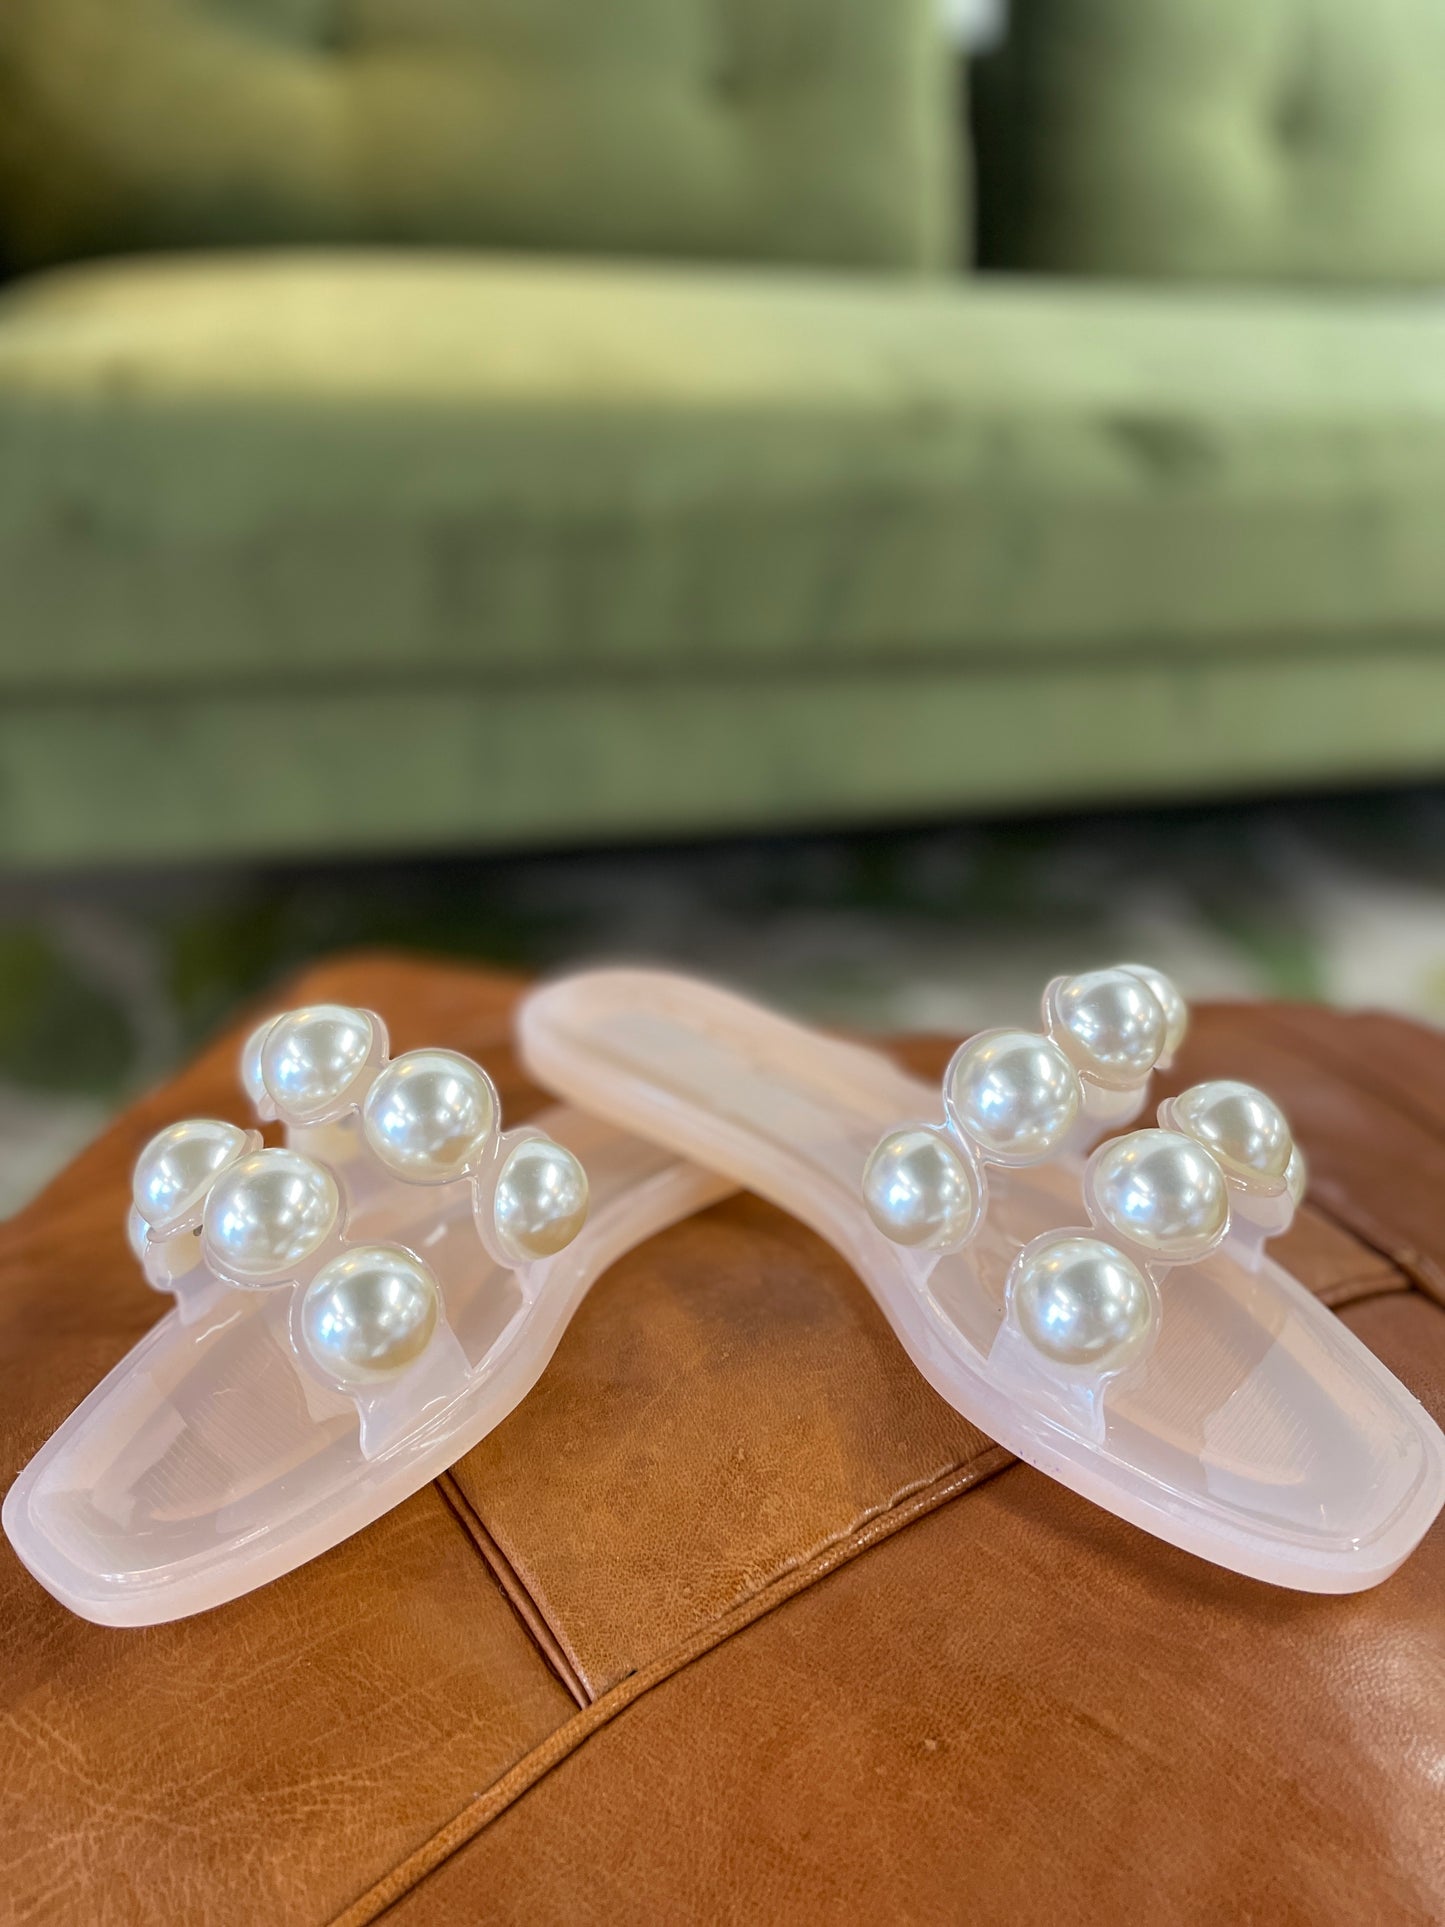 Jelly Sandals with White Pearls for the Summer